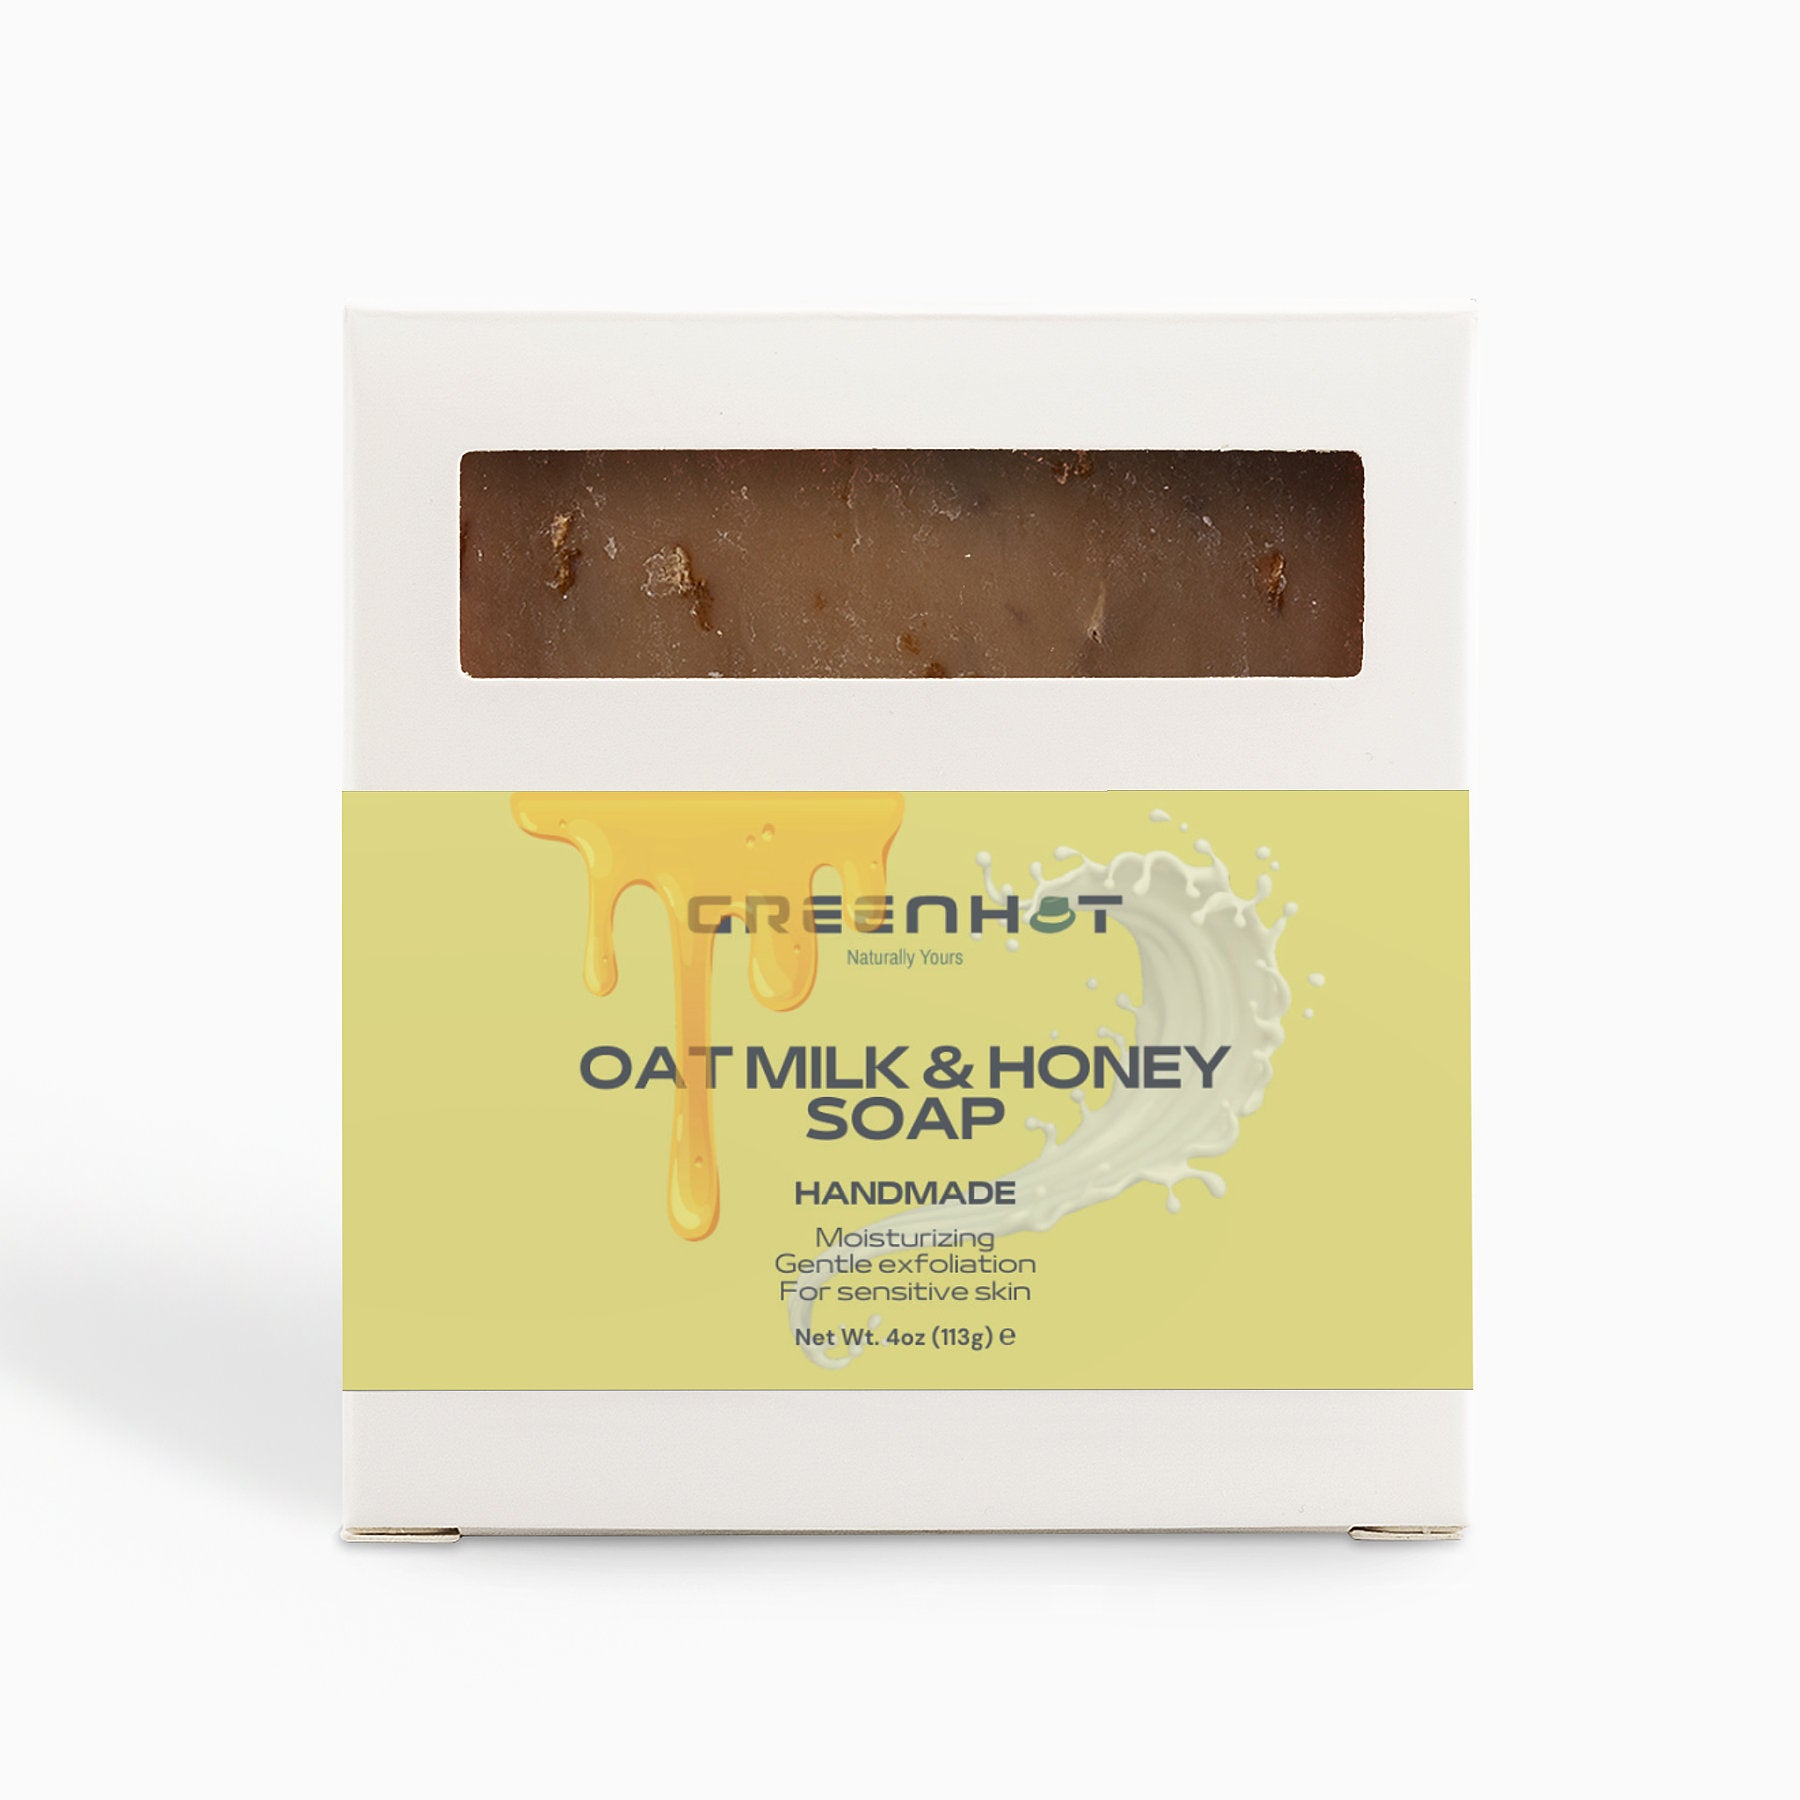 A box of GreenHat's Oat Milk Honey Soap, labeled as gentle for sensitive skin, with a visible brown soap bar at the top.